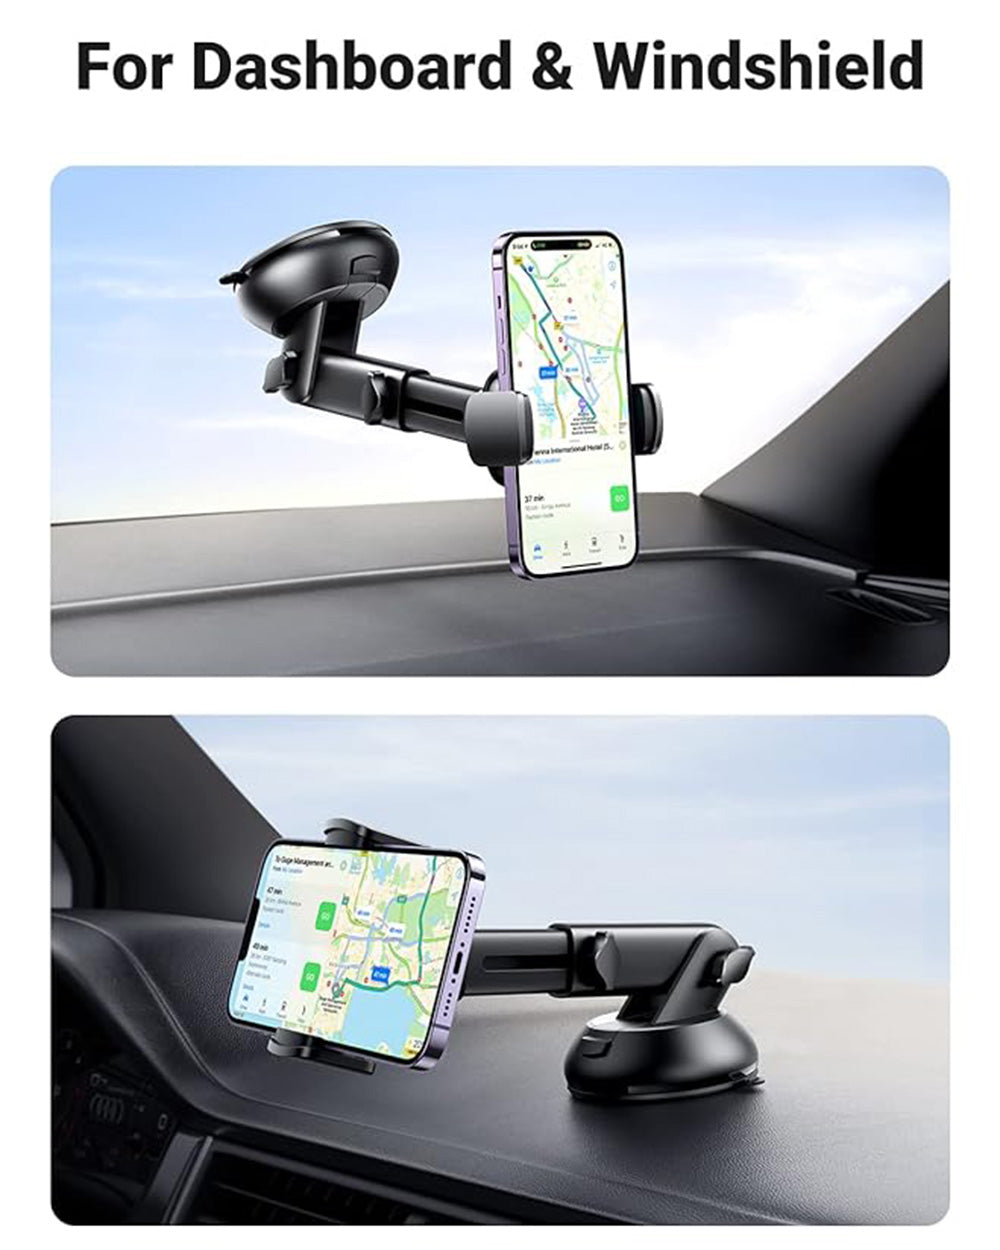 UGREEN Suction Cup Car Phone Mount